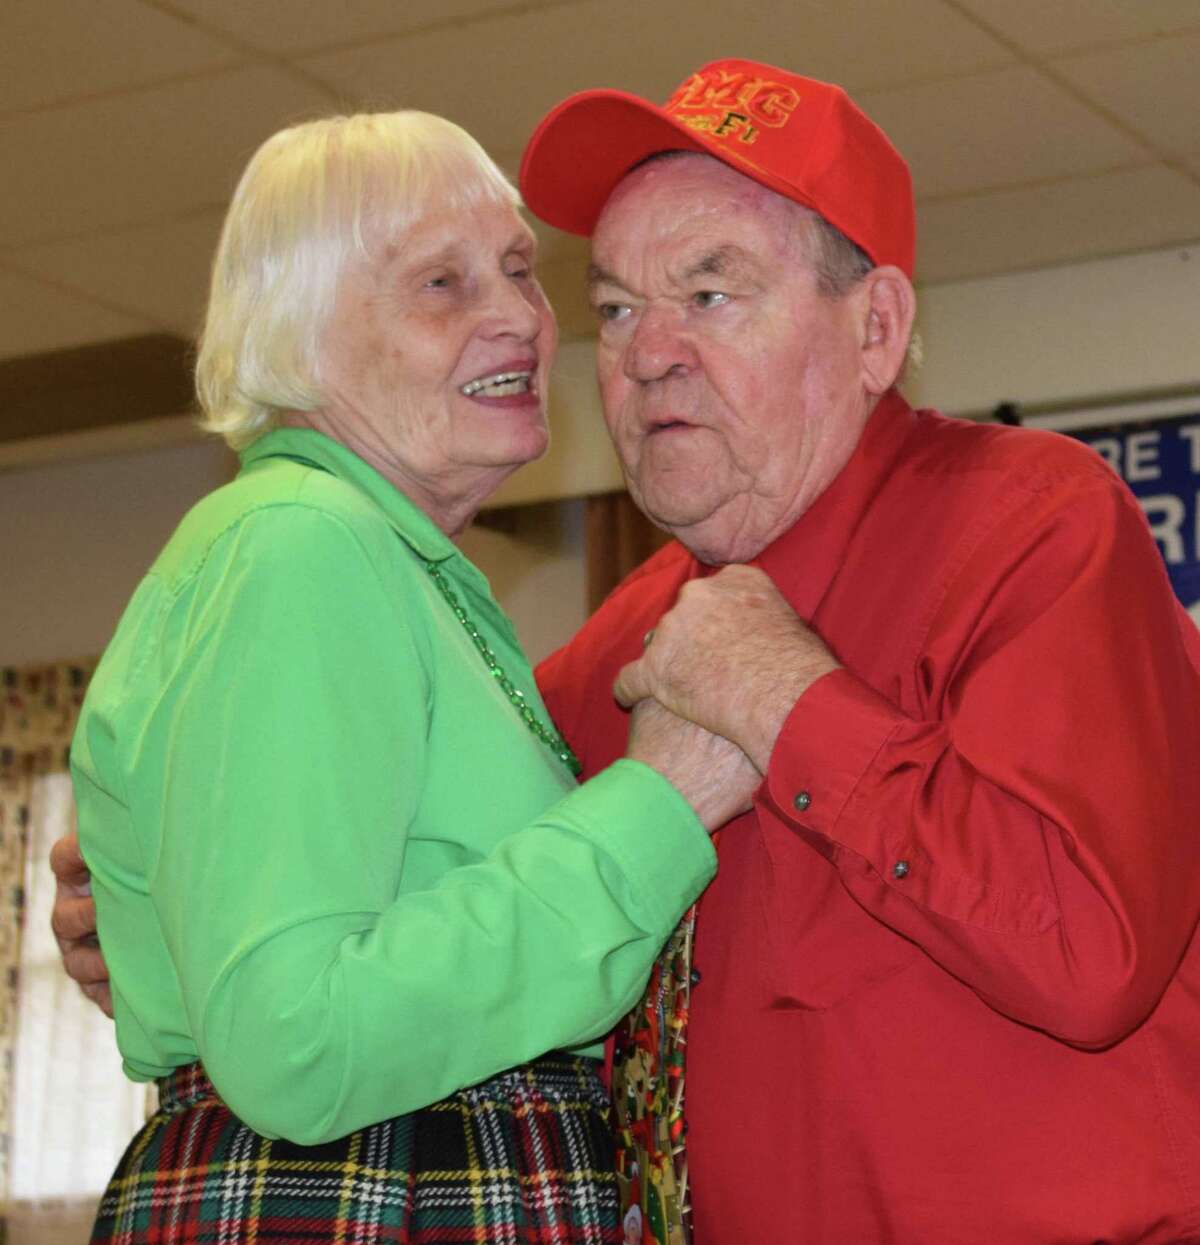 Spectrum/The Lions Club of New Milford held its annual Christmas party for seniors at the VFW Hall in town Dec. 2, 2018. More than 200 guests attended the festivities. Above, Don and Lorna MacInnis of New Milford share the dance floor as the band The Bellas performs "You Belong to Me."